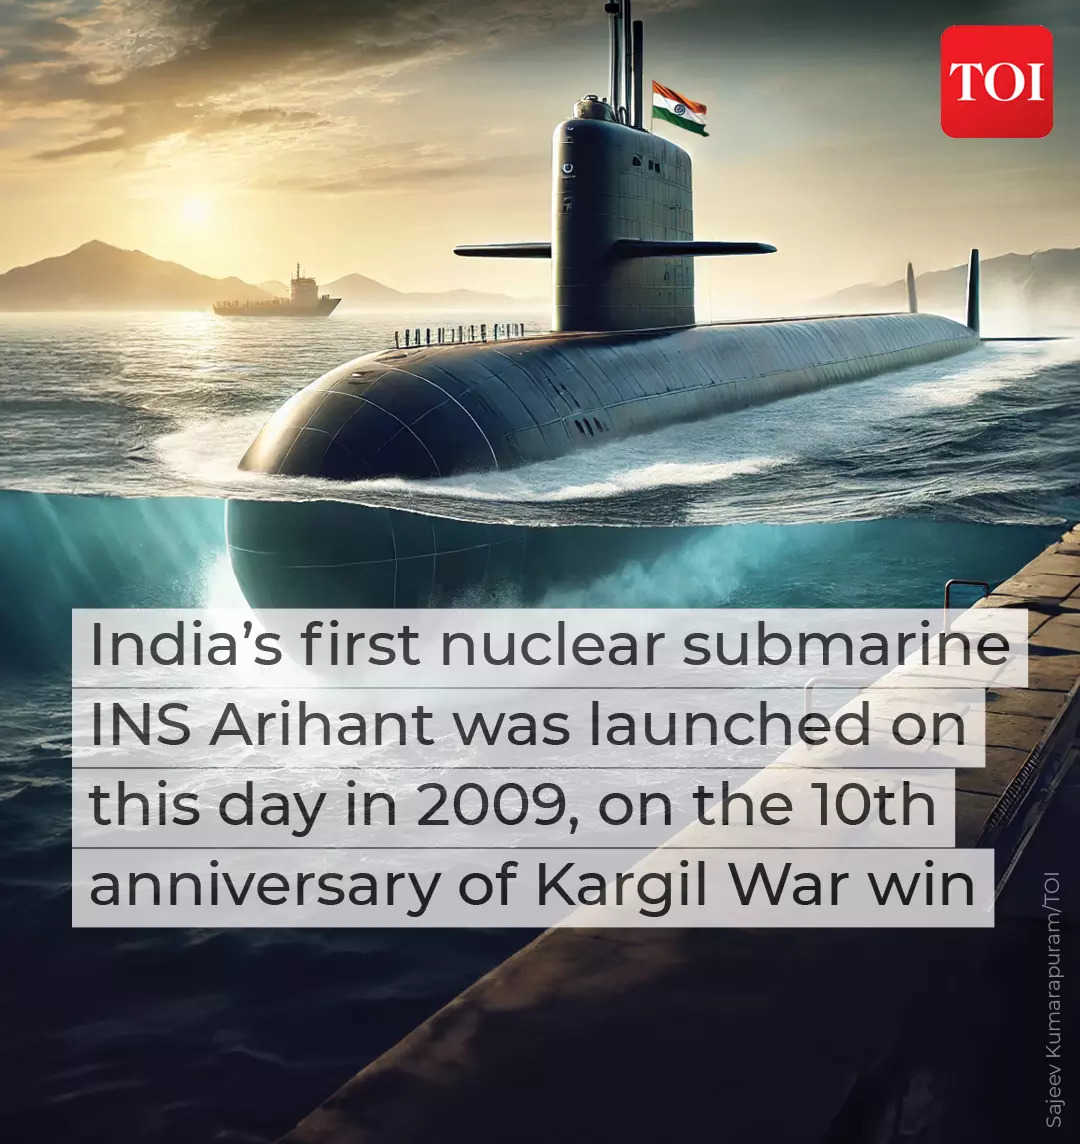 7. India’s one and only INS Arihant